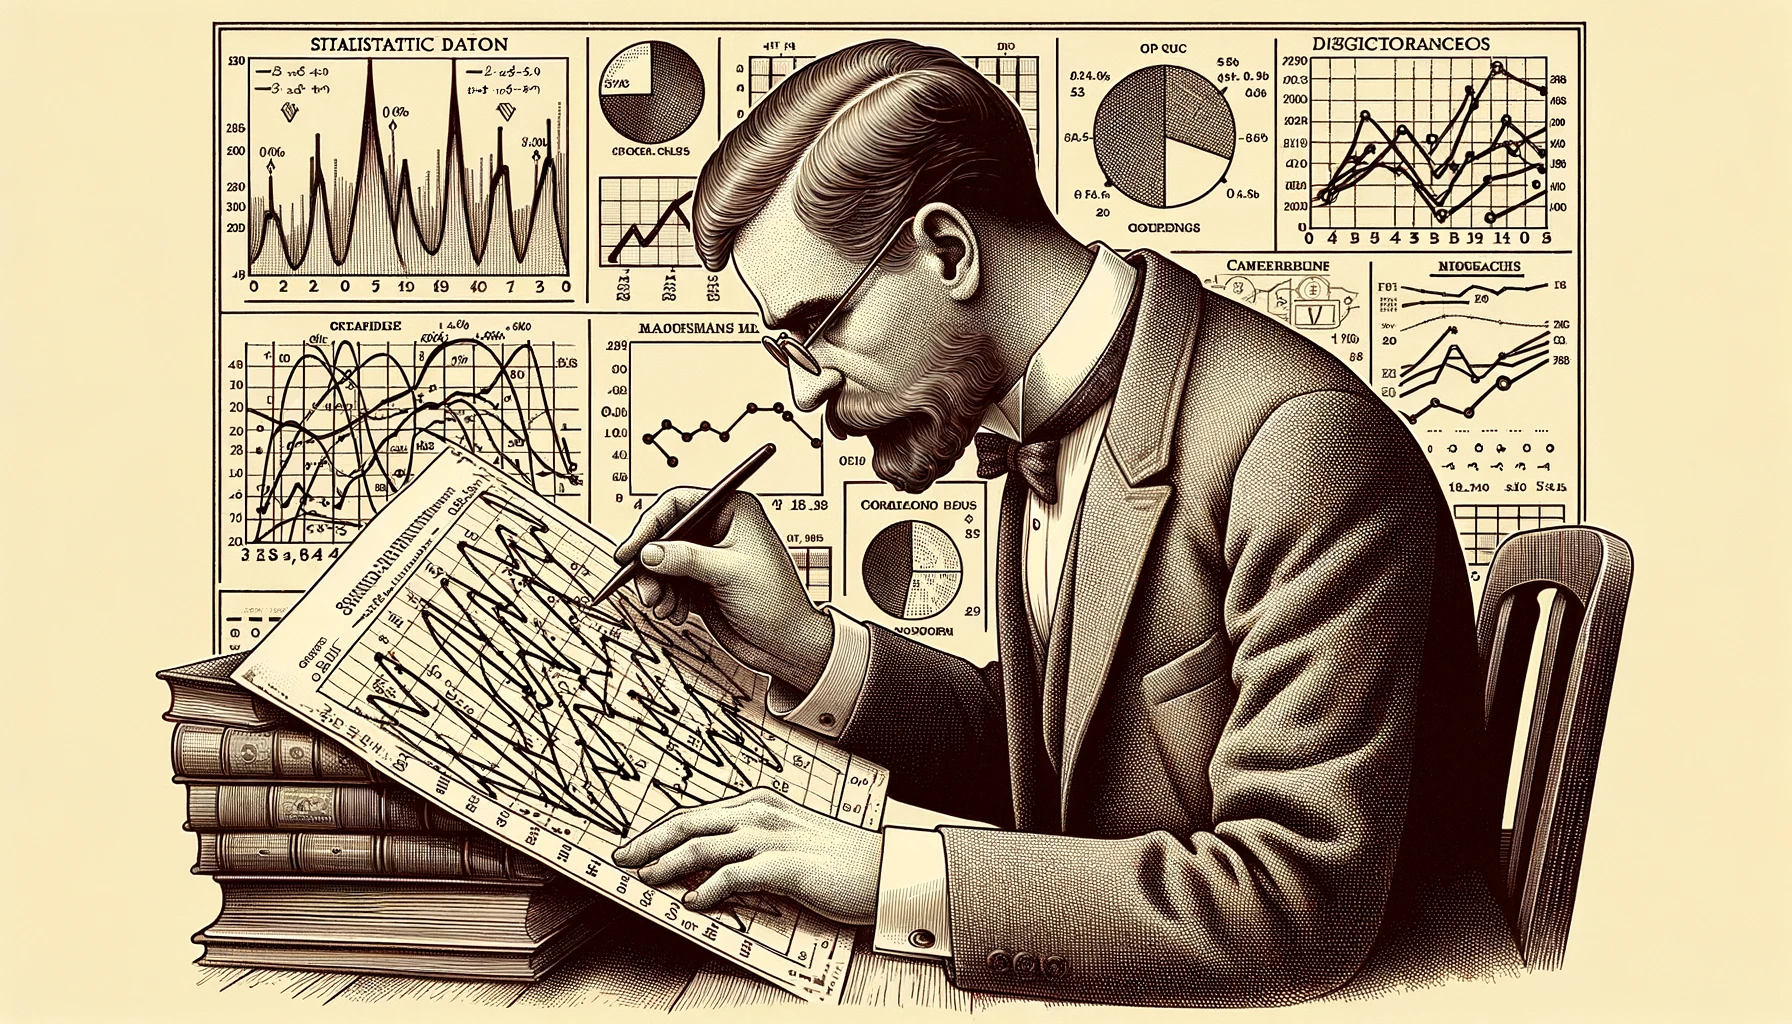 DALL·E 2023-10-07 14.58.58 - Illustration in a vintage style showing a statistician from yesteryears deeply engrossed in studying a complex graph with annotations.png